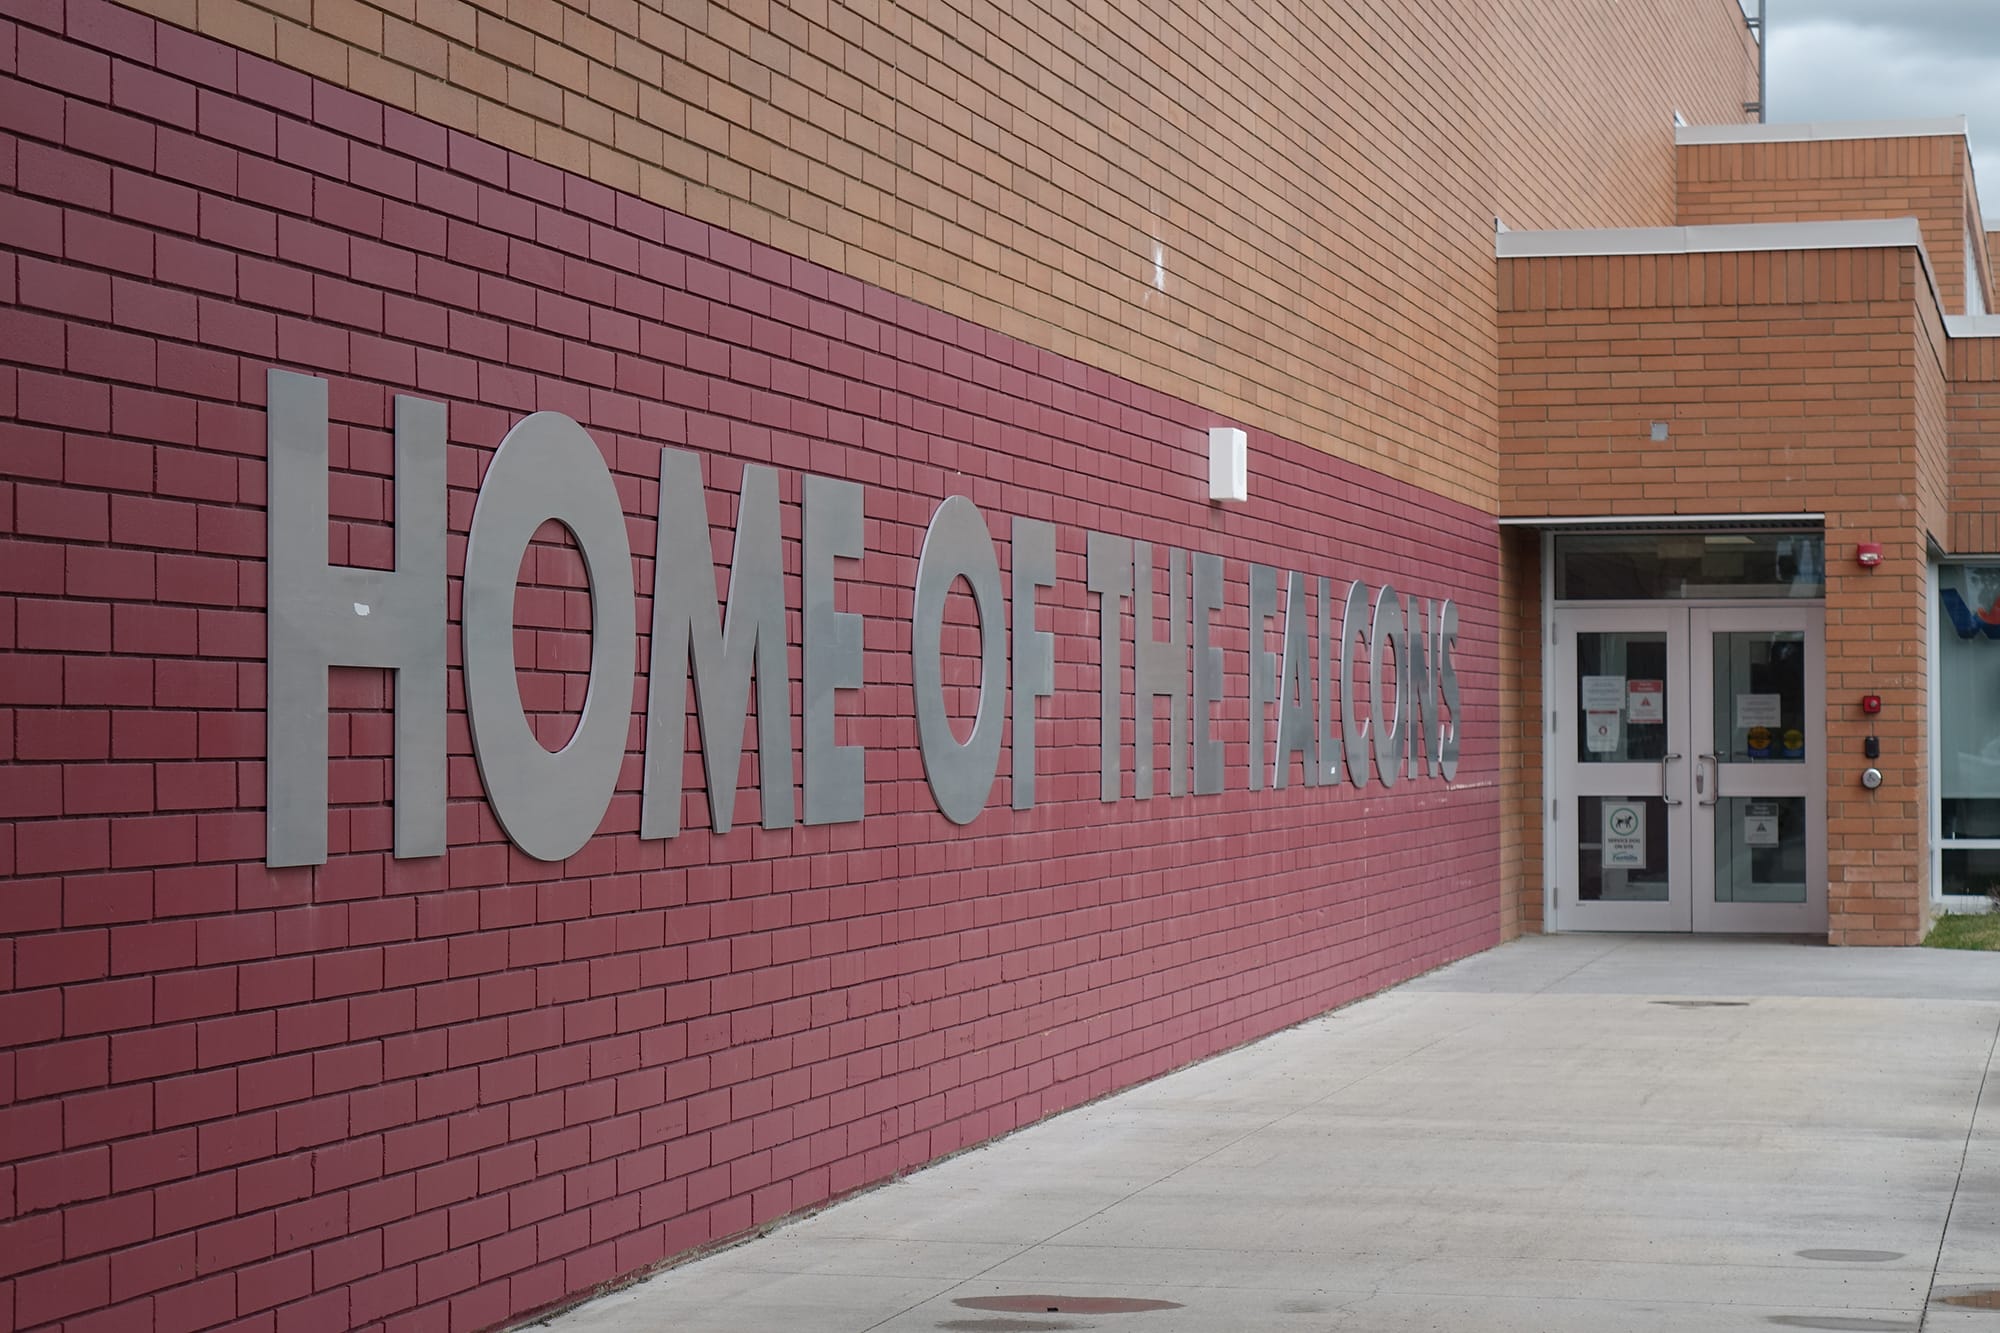 Foothills Composite High School wall with home of the Falcons